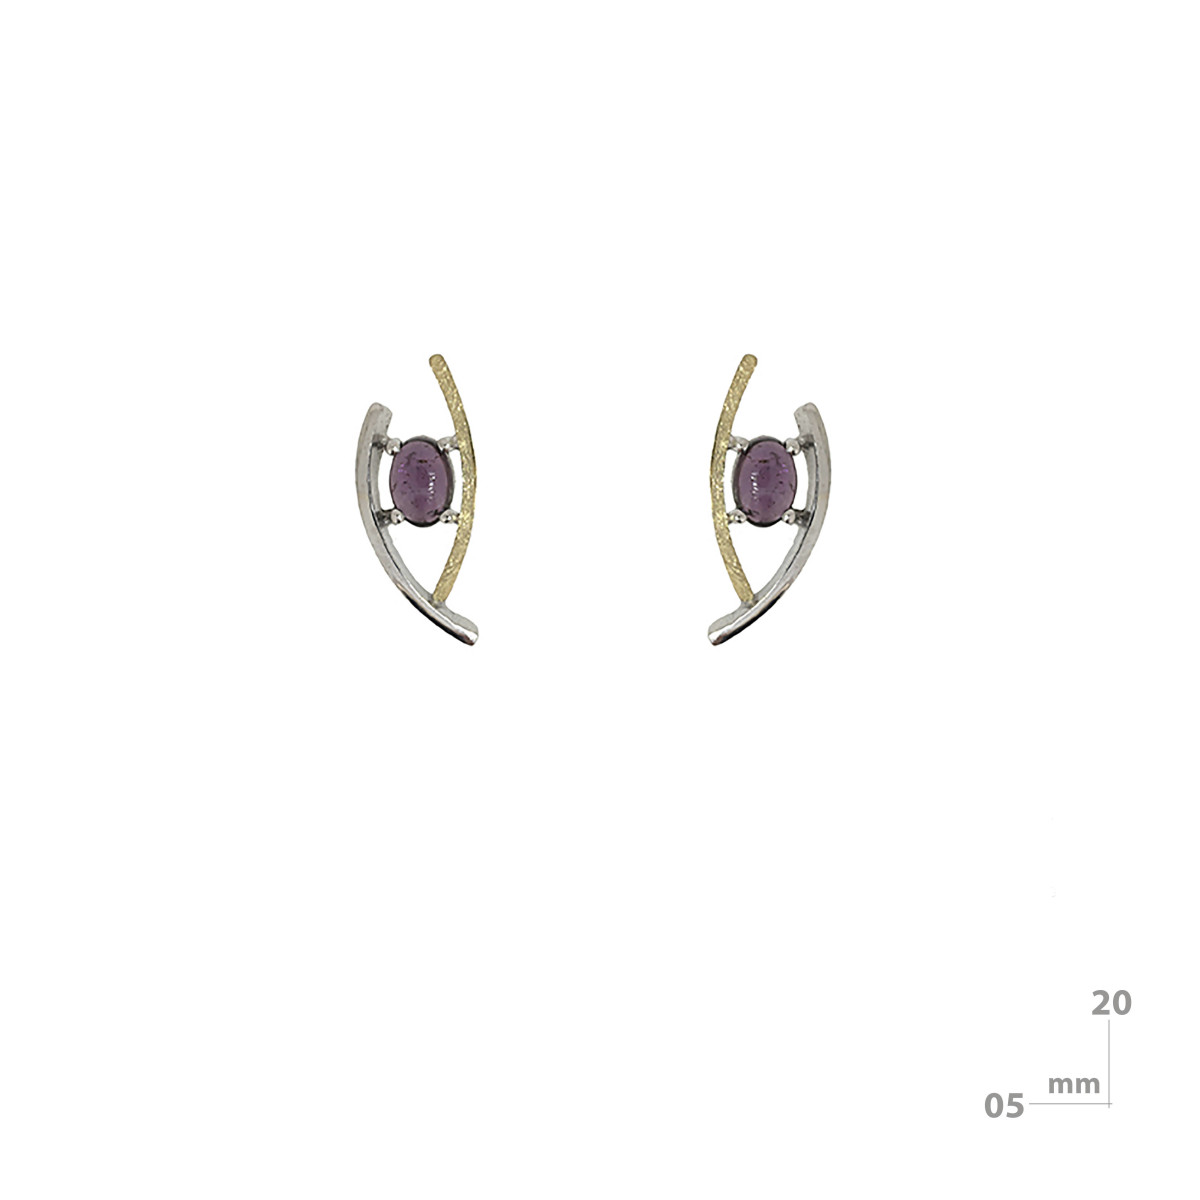 Silver, gold and rhodolite earrings